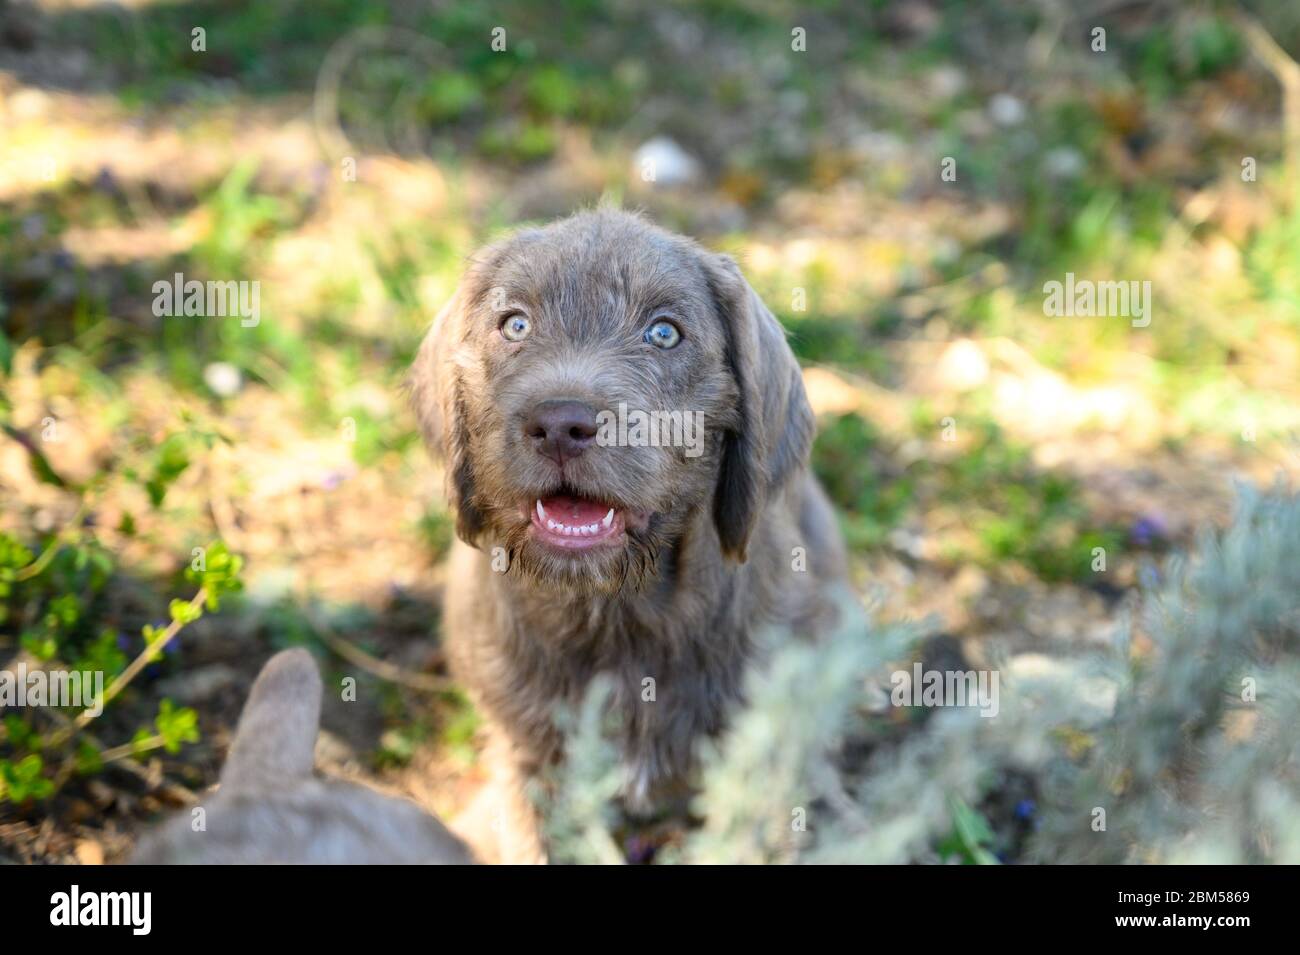 Grey-haired puppy in the garden. The puppy is of the breed: Slovak Rough-haired Pointer or Slovak Wirehaired Pointing Griffon Stock Photo